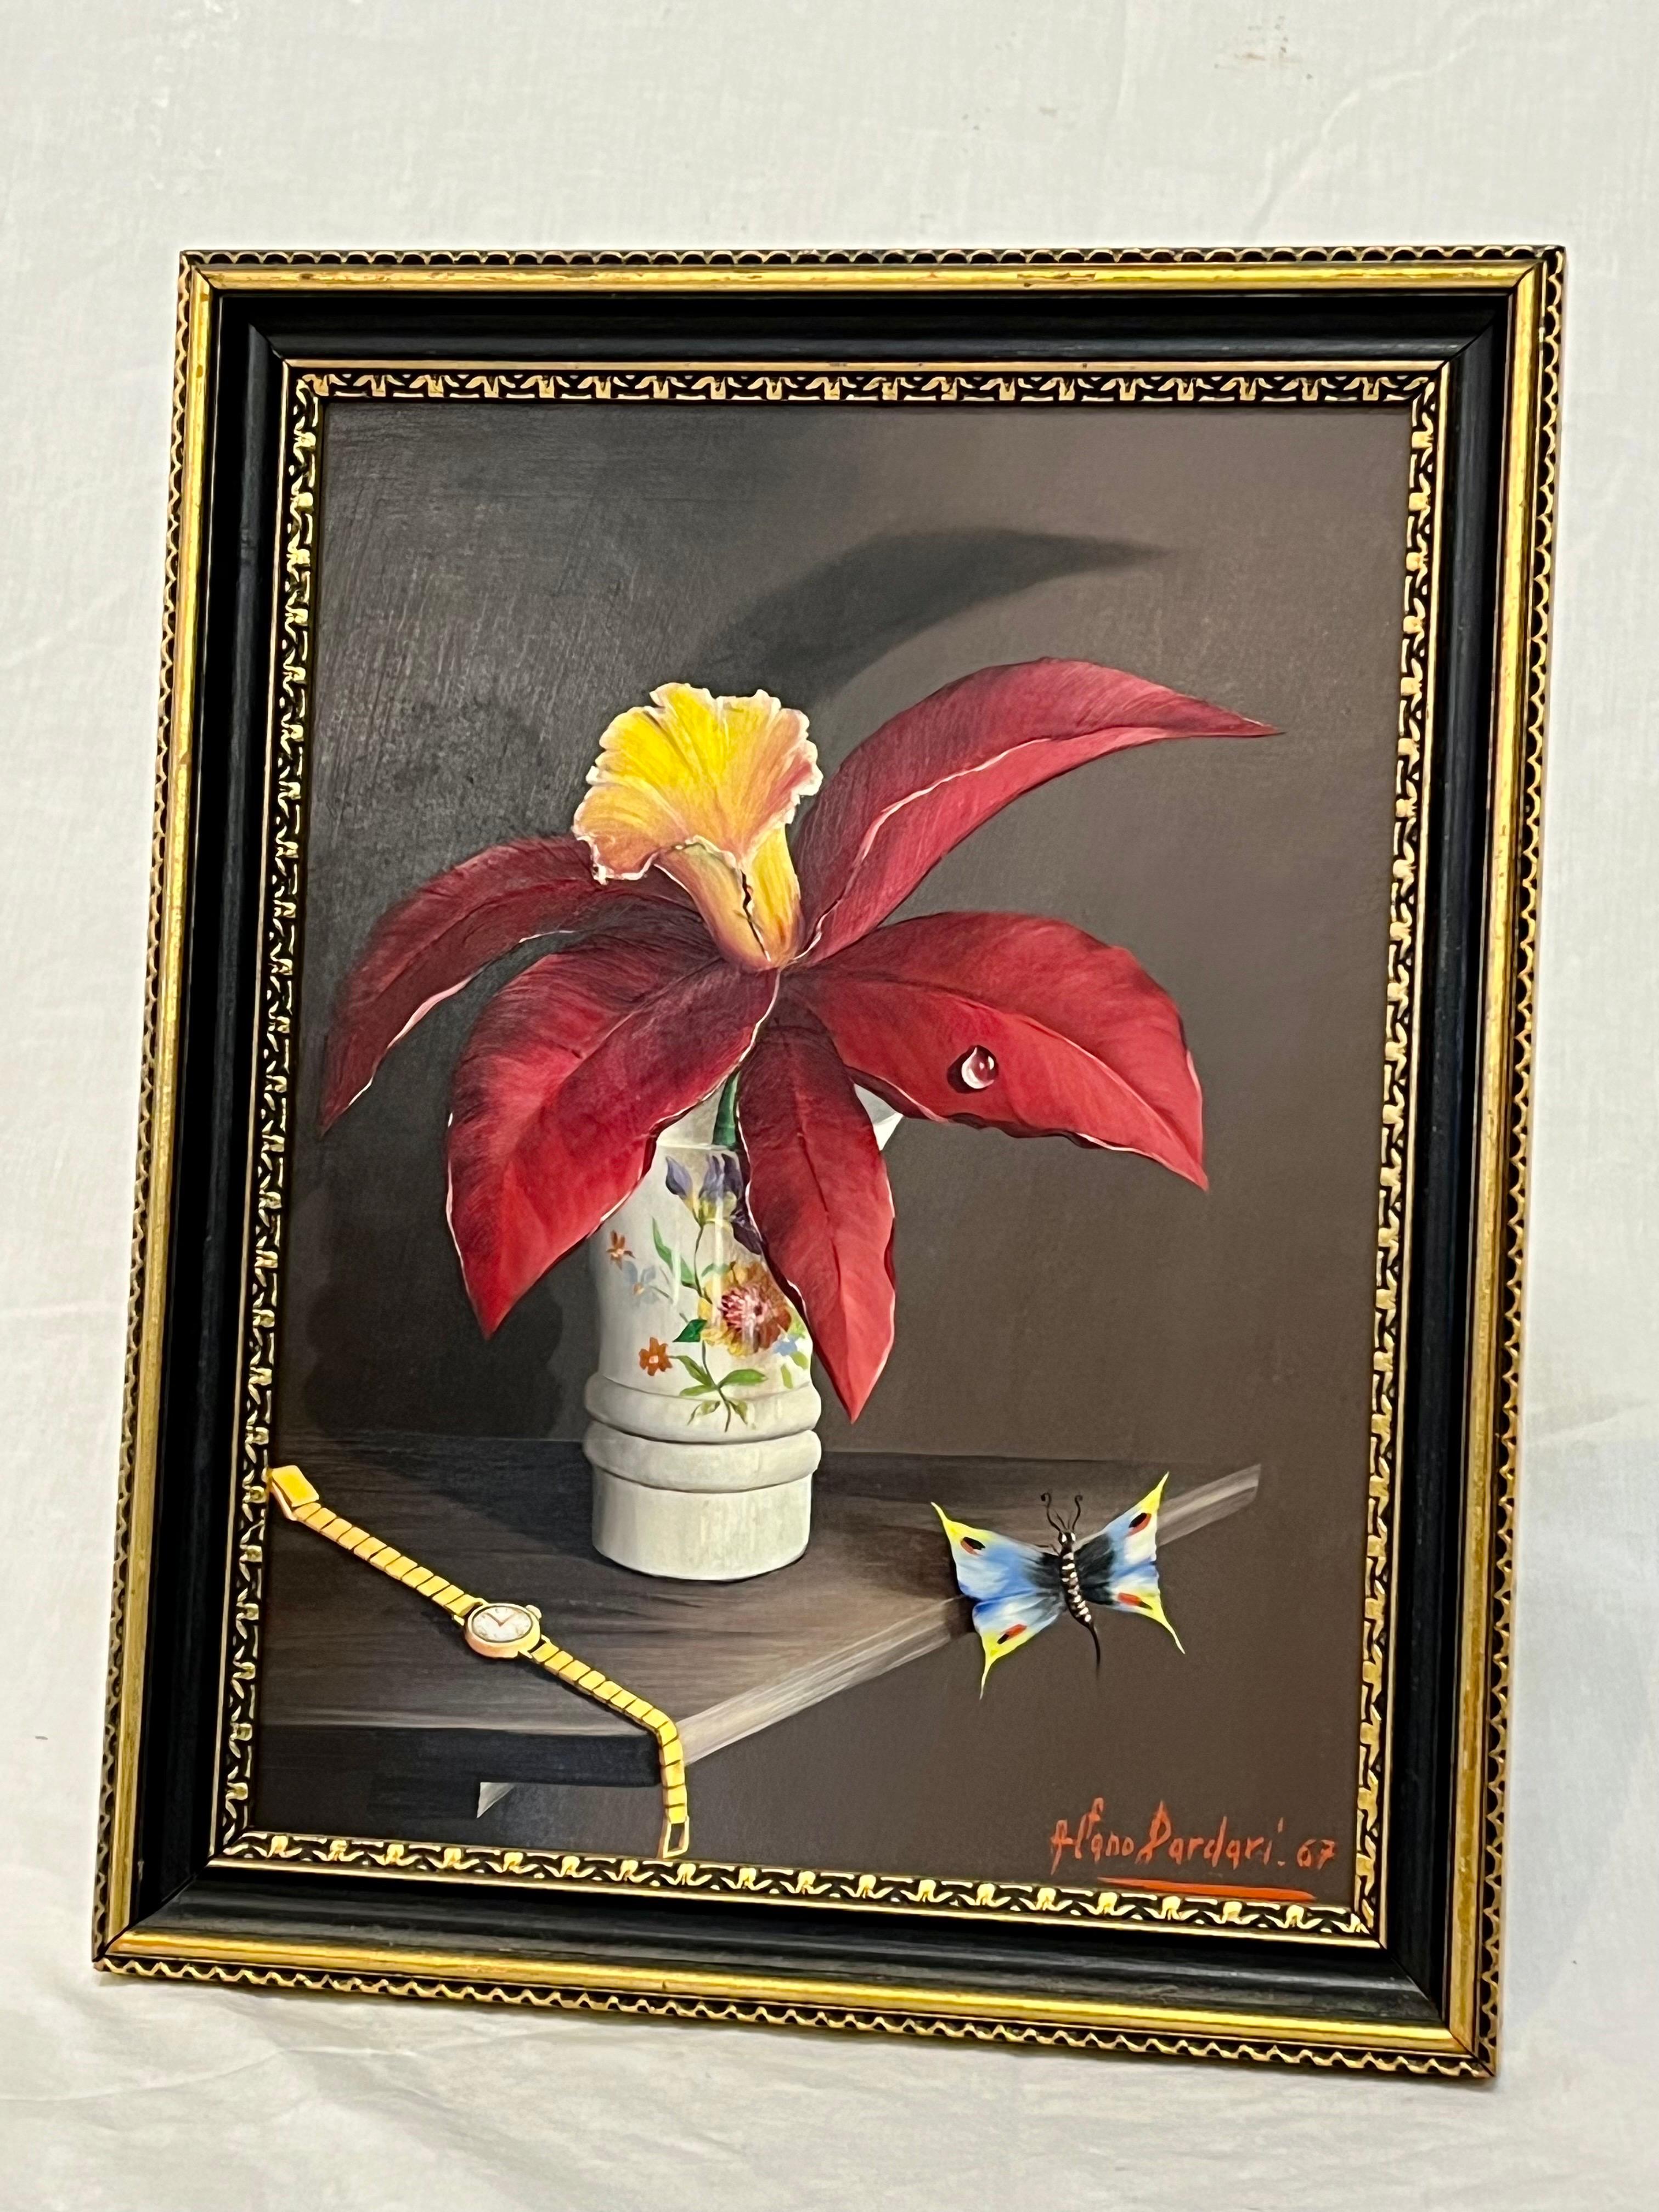 A stunning trompe l'oeil (fool the eye) mid 20th century Italian oil painting by artist Alfano Dardari. This work depicts a beautiful flower in a vase with a perfect little droplet of water resting ever so gently on a petal. The flower in the vase